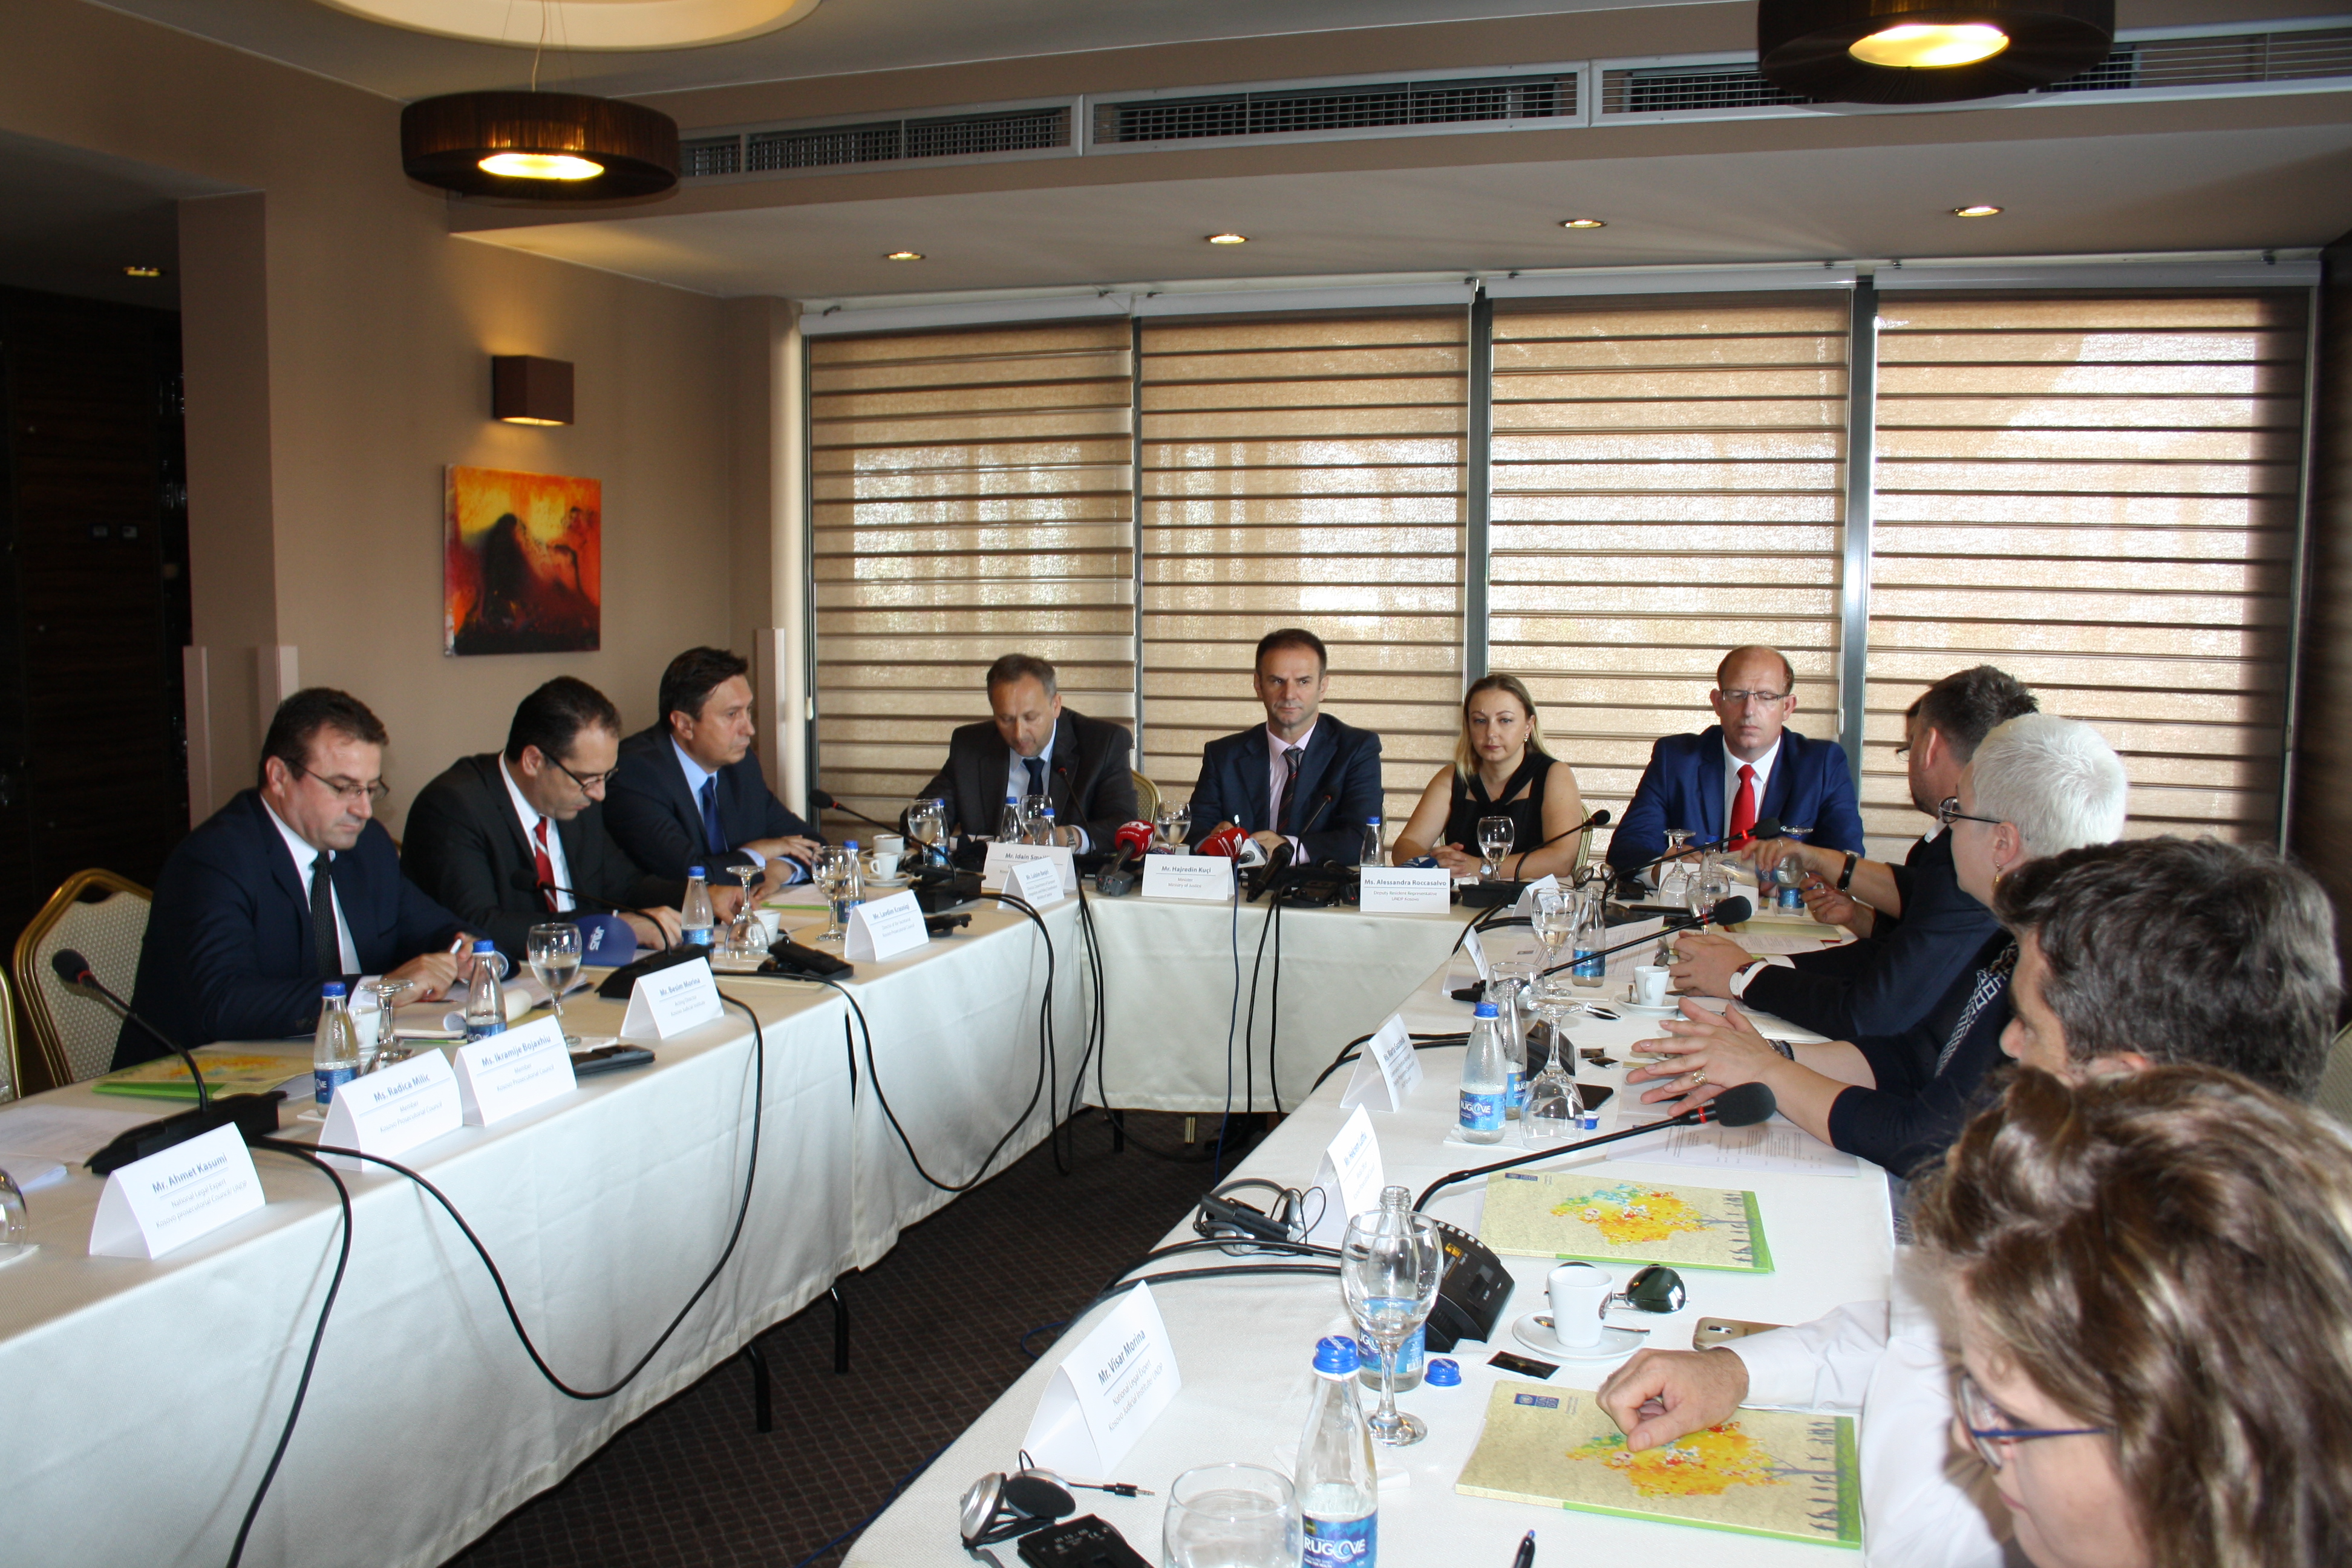 Joint Roundtable of Justice Institutions Representatives